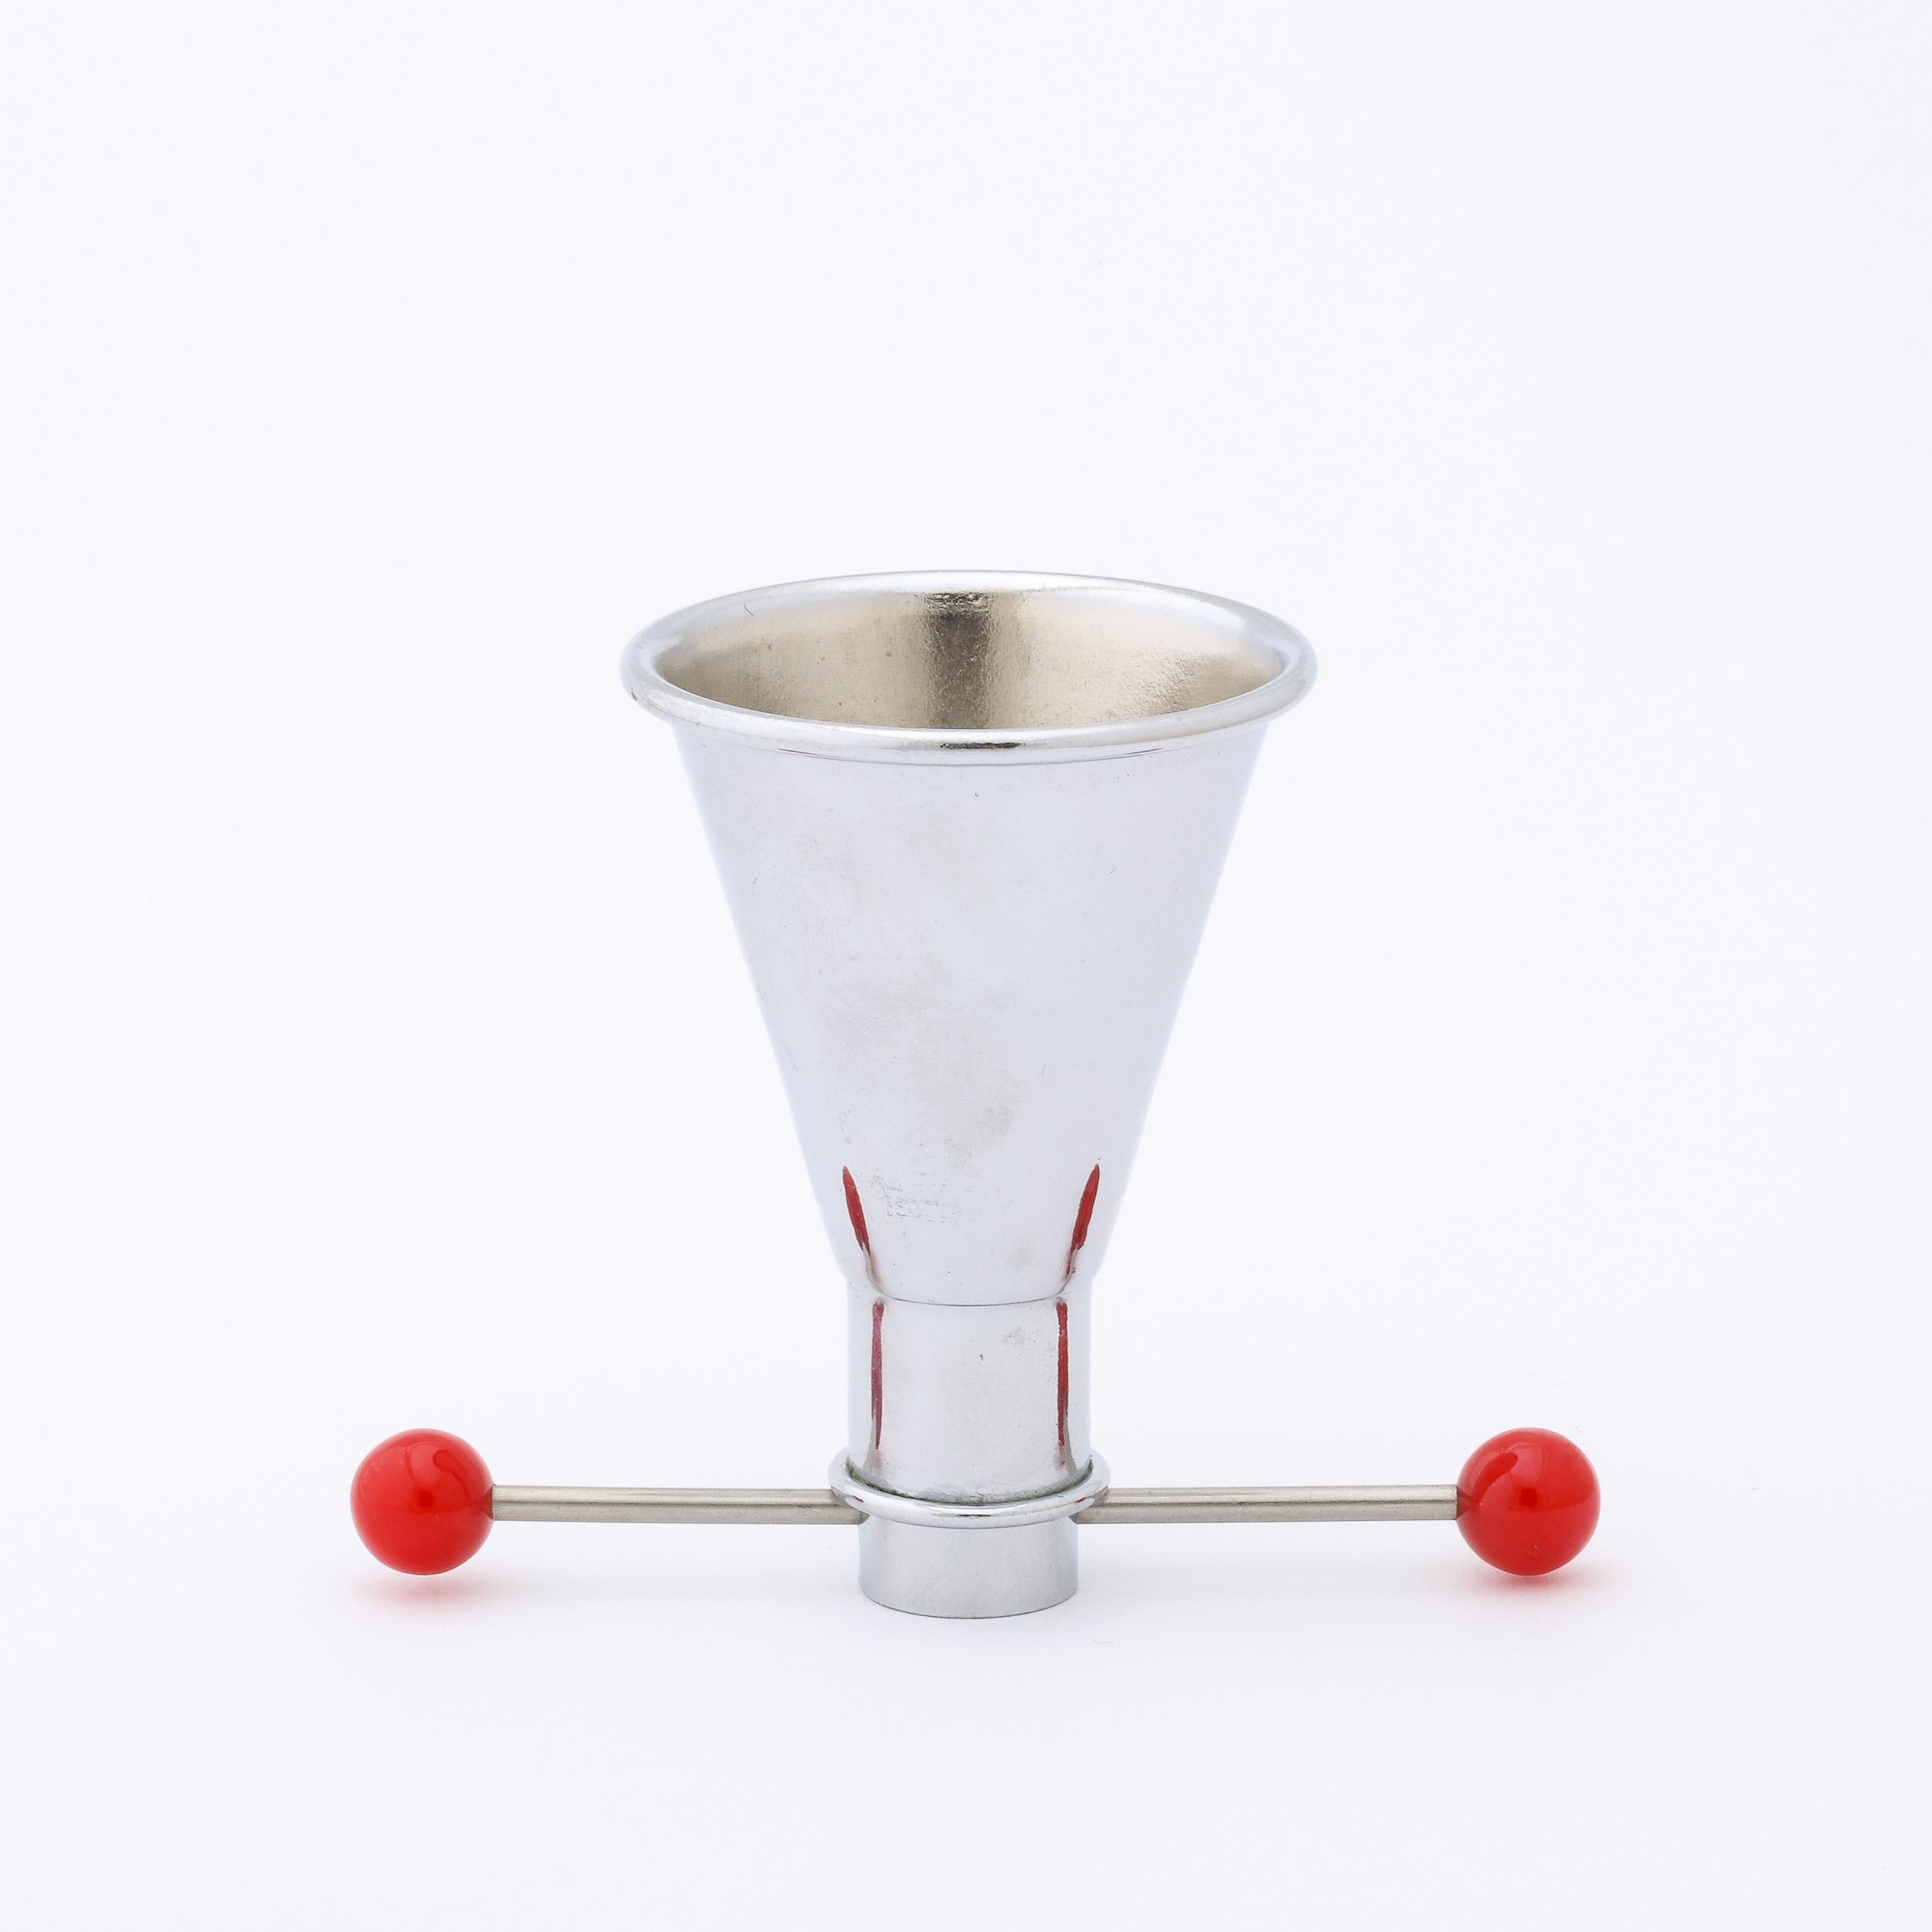 A beautiful and functional Art Deco Cocktail Jigger in Chrome with Red Bakelite detailing, this piece originates from the United States Circa 1930. The conical form is fabricated in Polished Chrome with two spheres of Candy Red Bakelite. Its cross